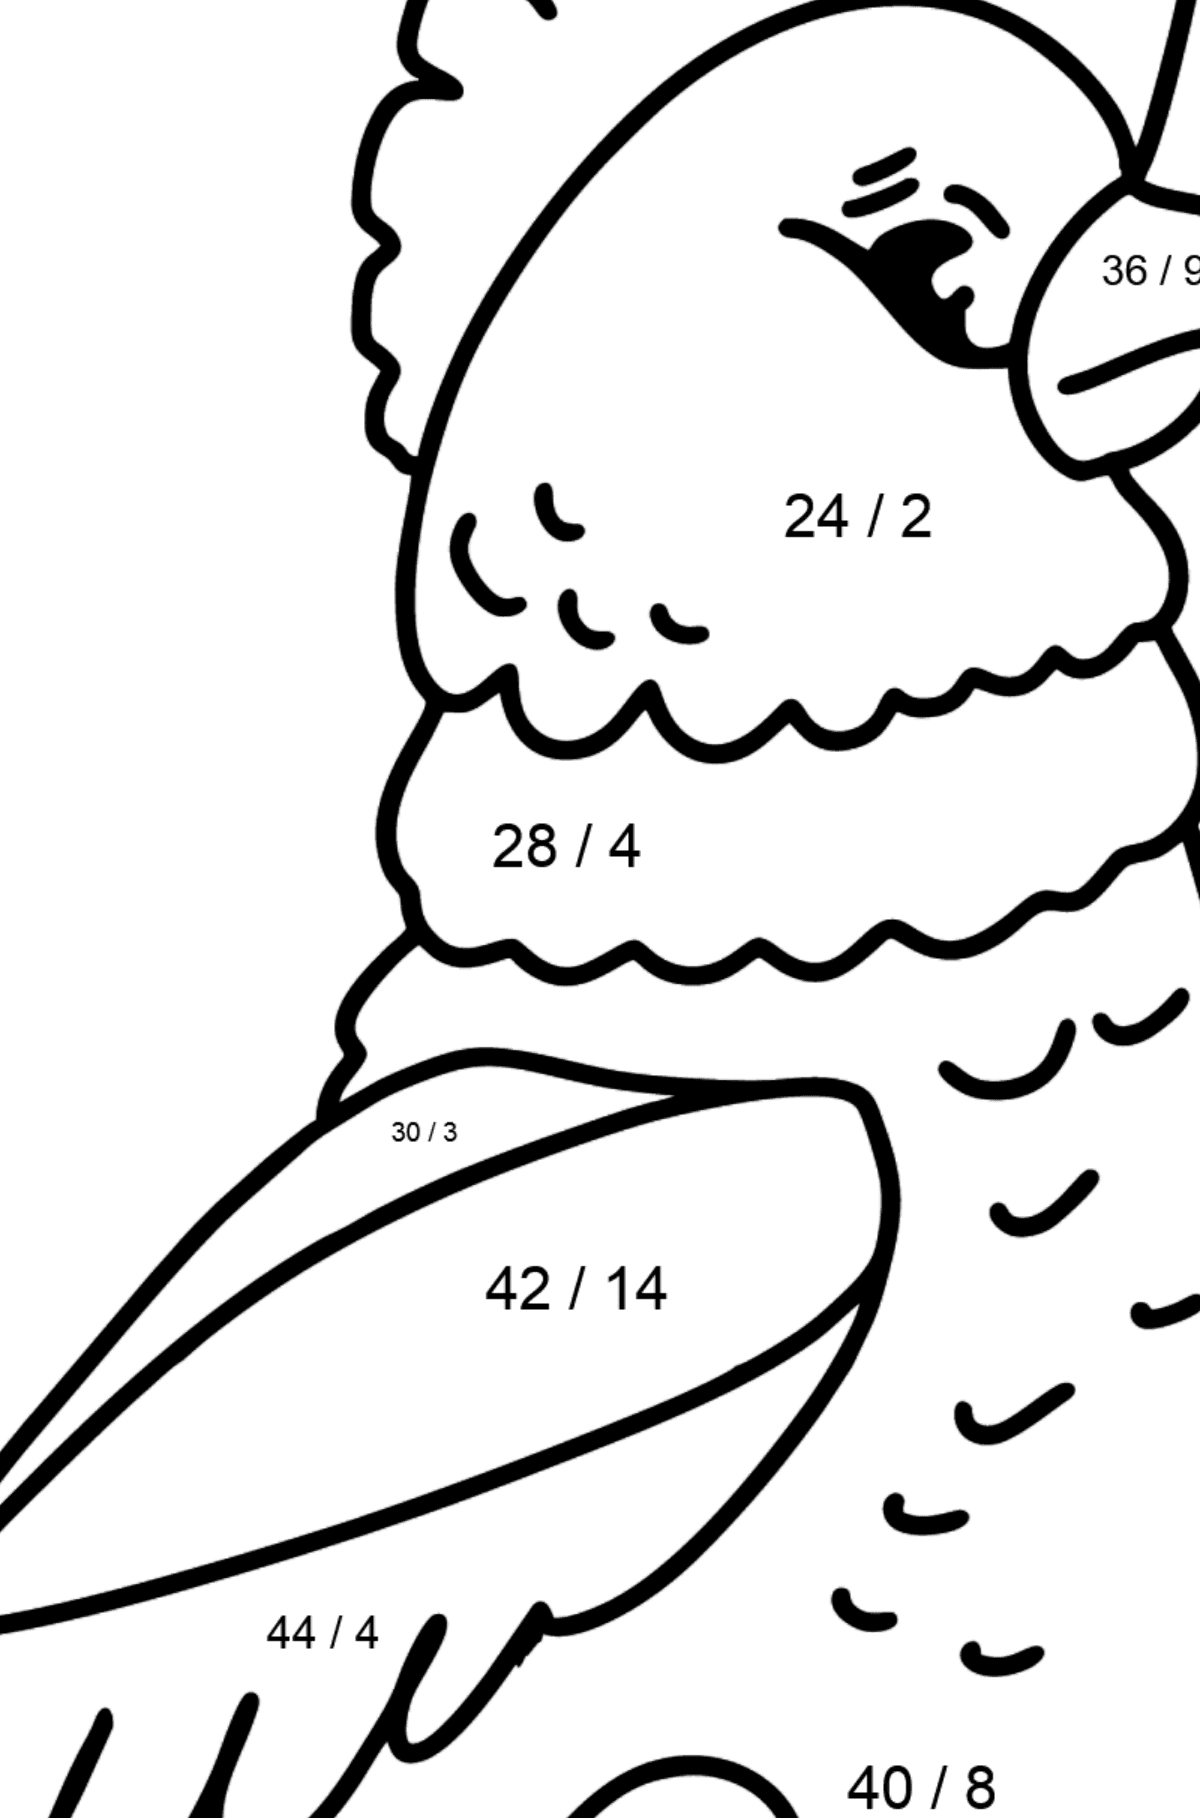 Cockatoo coloring page - Math Coloring - Division for Kids